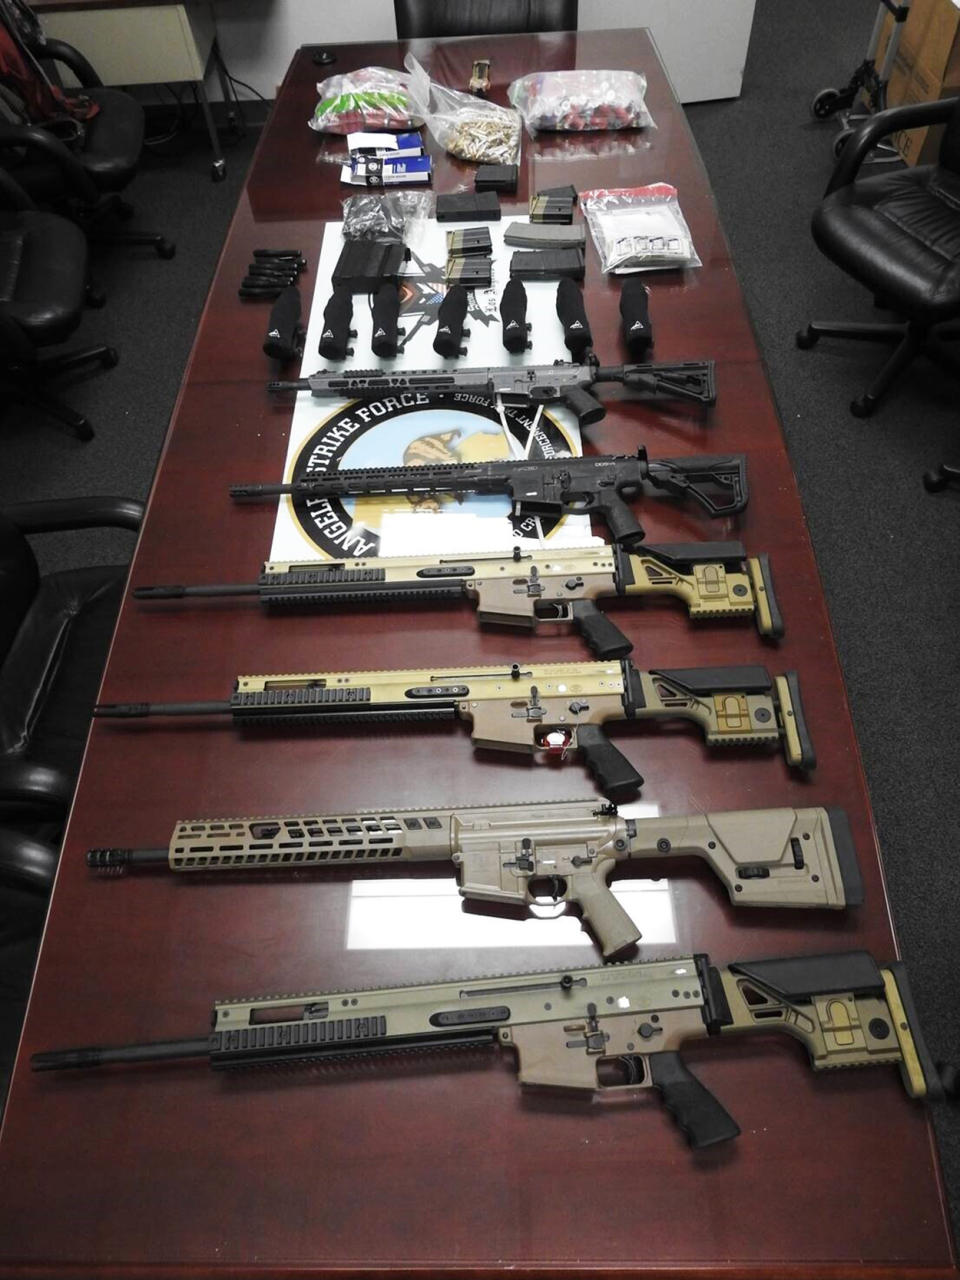 High-powered firearms and ammunition in an undated photo provided by the Justice Department. (U.S. Justice Department via AP)